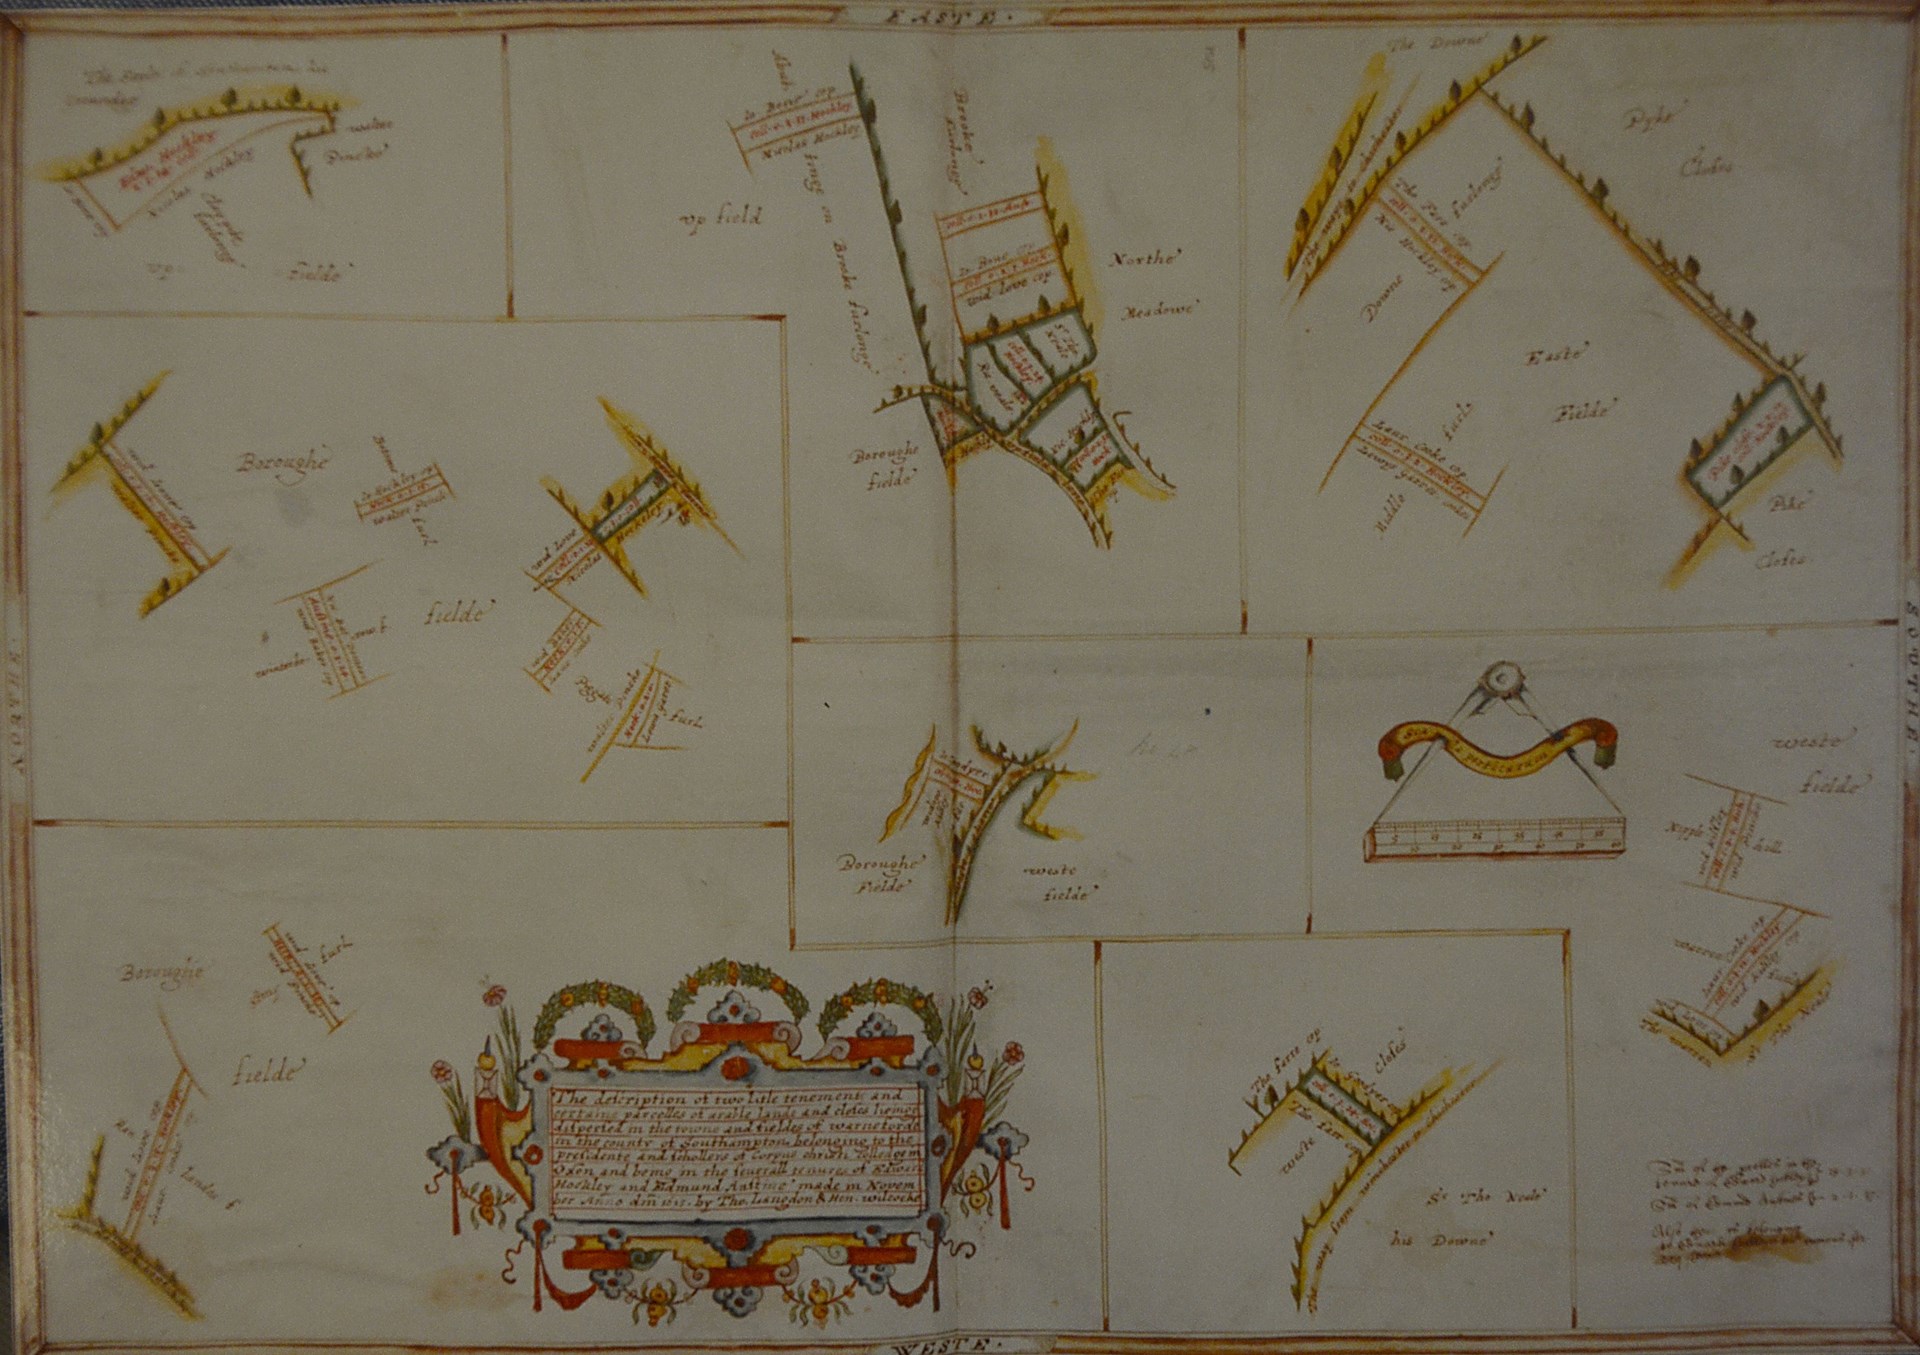 Langdon Map of Warnford from 1615